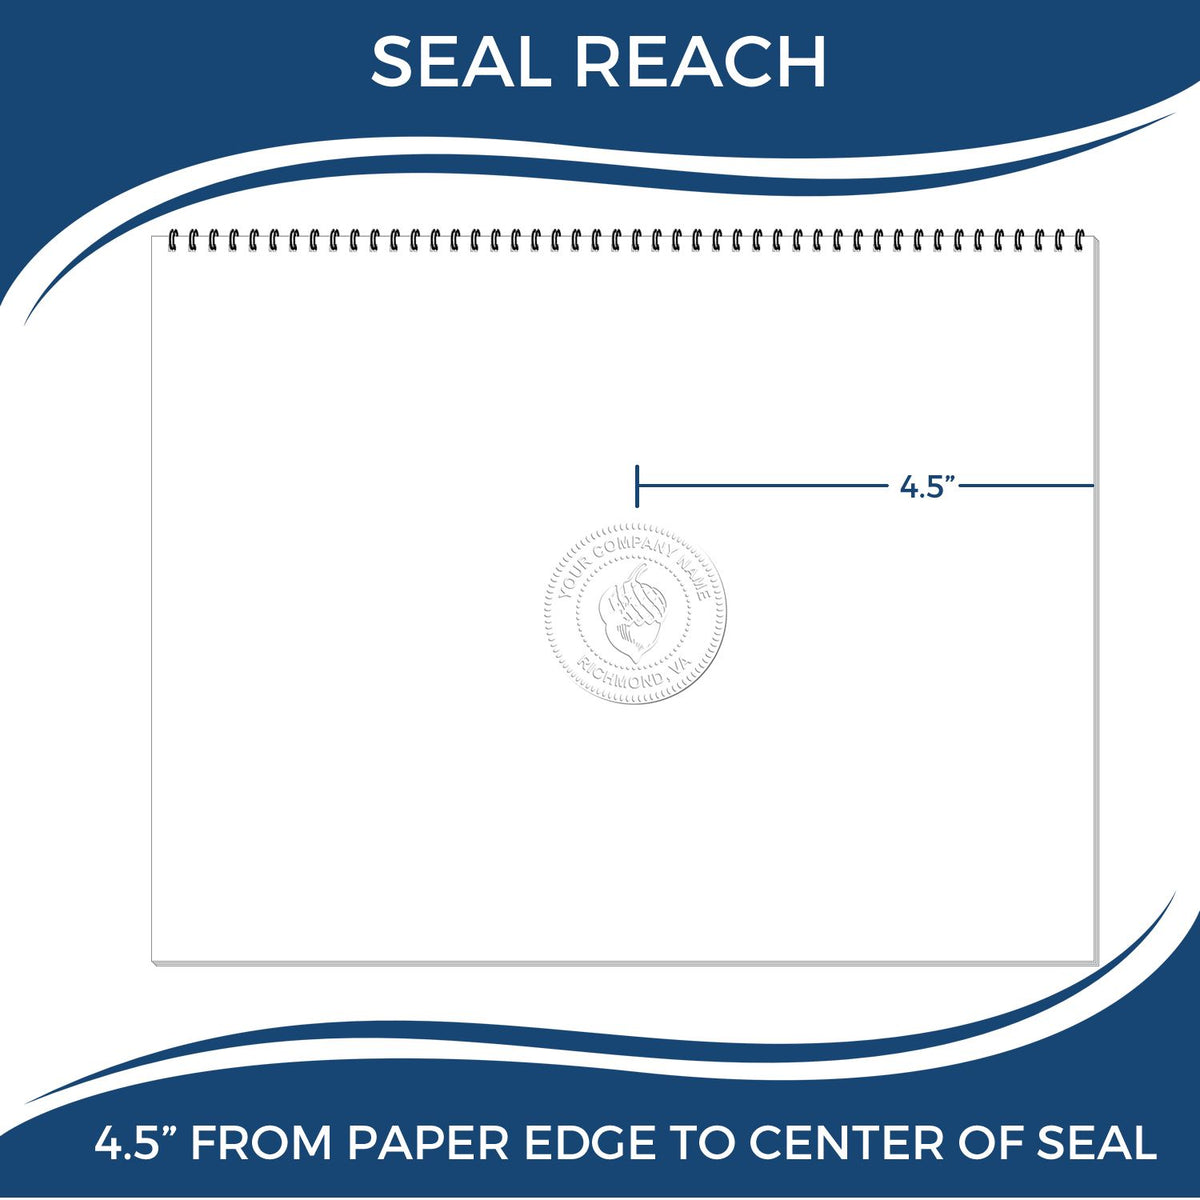 An infographic showing the seal reach which is represented by a ruler and a miniature seal image of the State of Idaho Extended Long Reach Engineer Seal